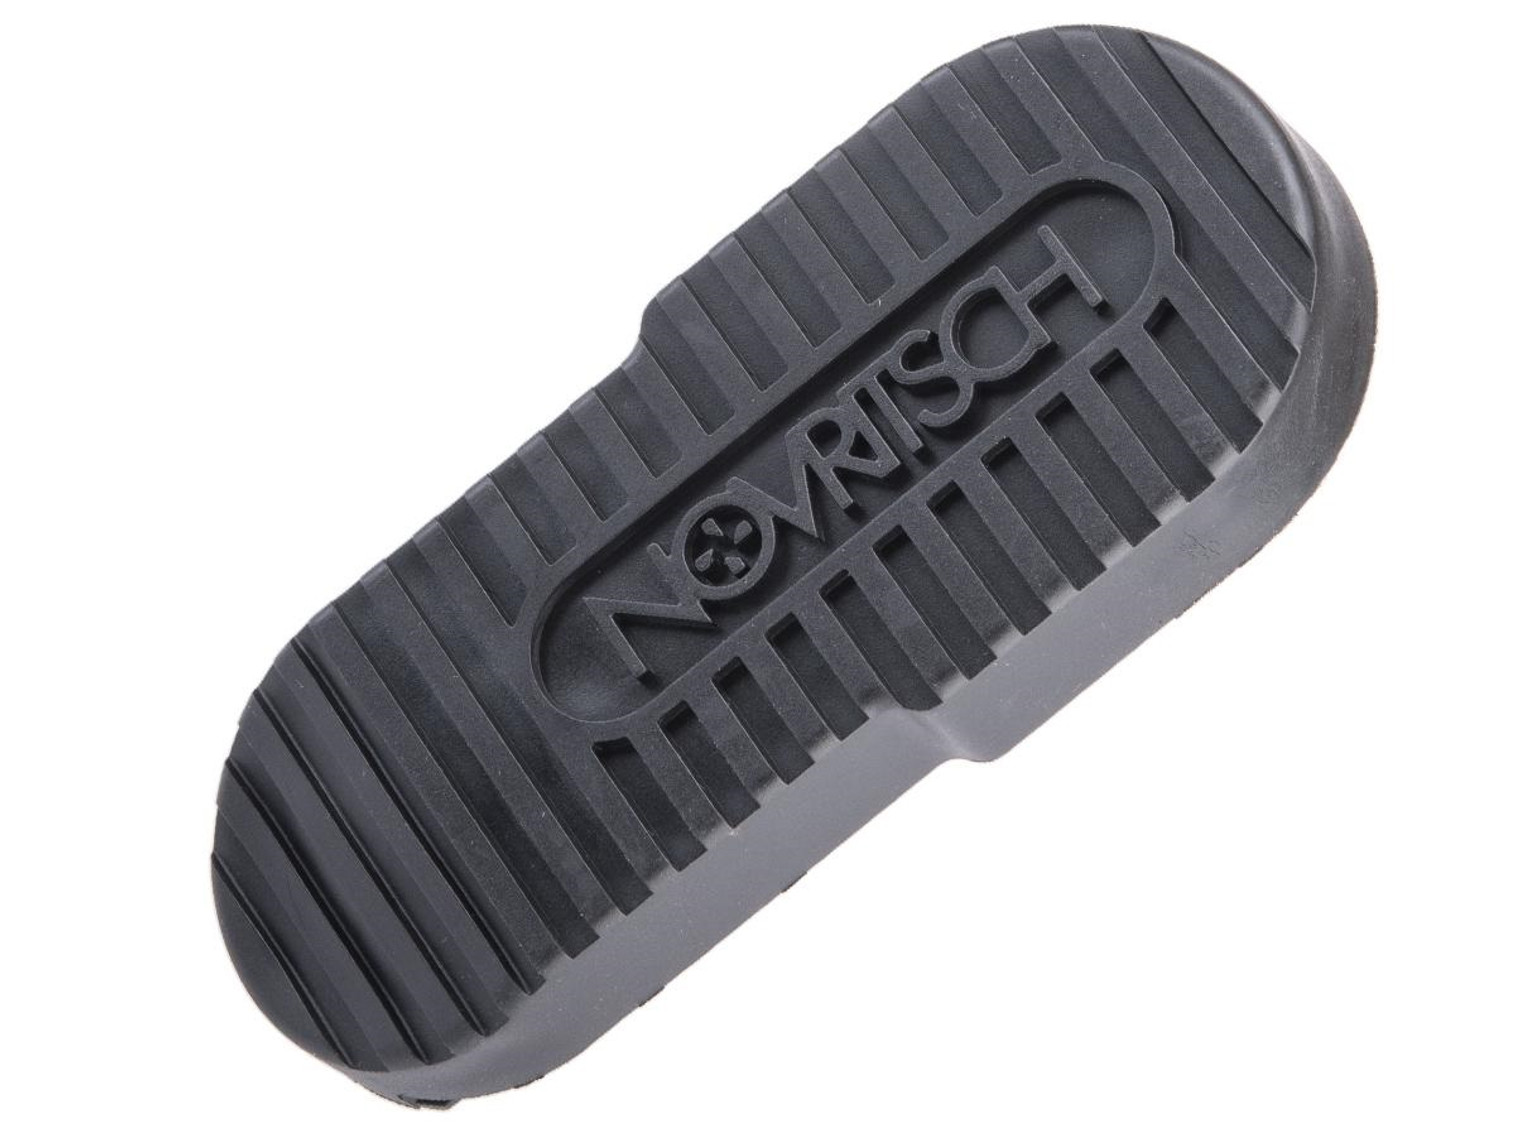 Novritsch Extended Rubber Stock Pad for SSR90 Airsoft AEG SMGs
